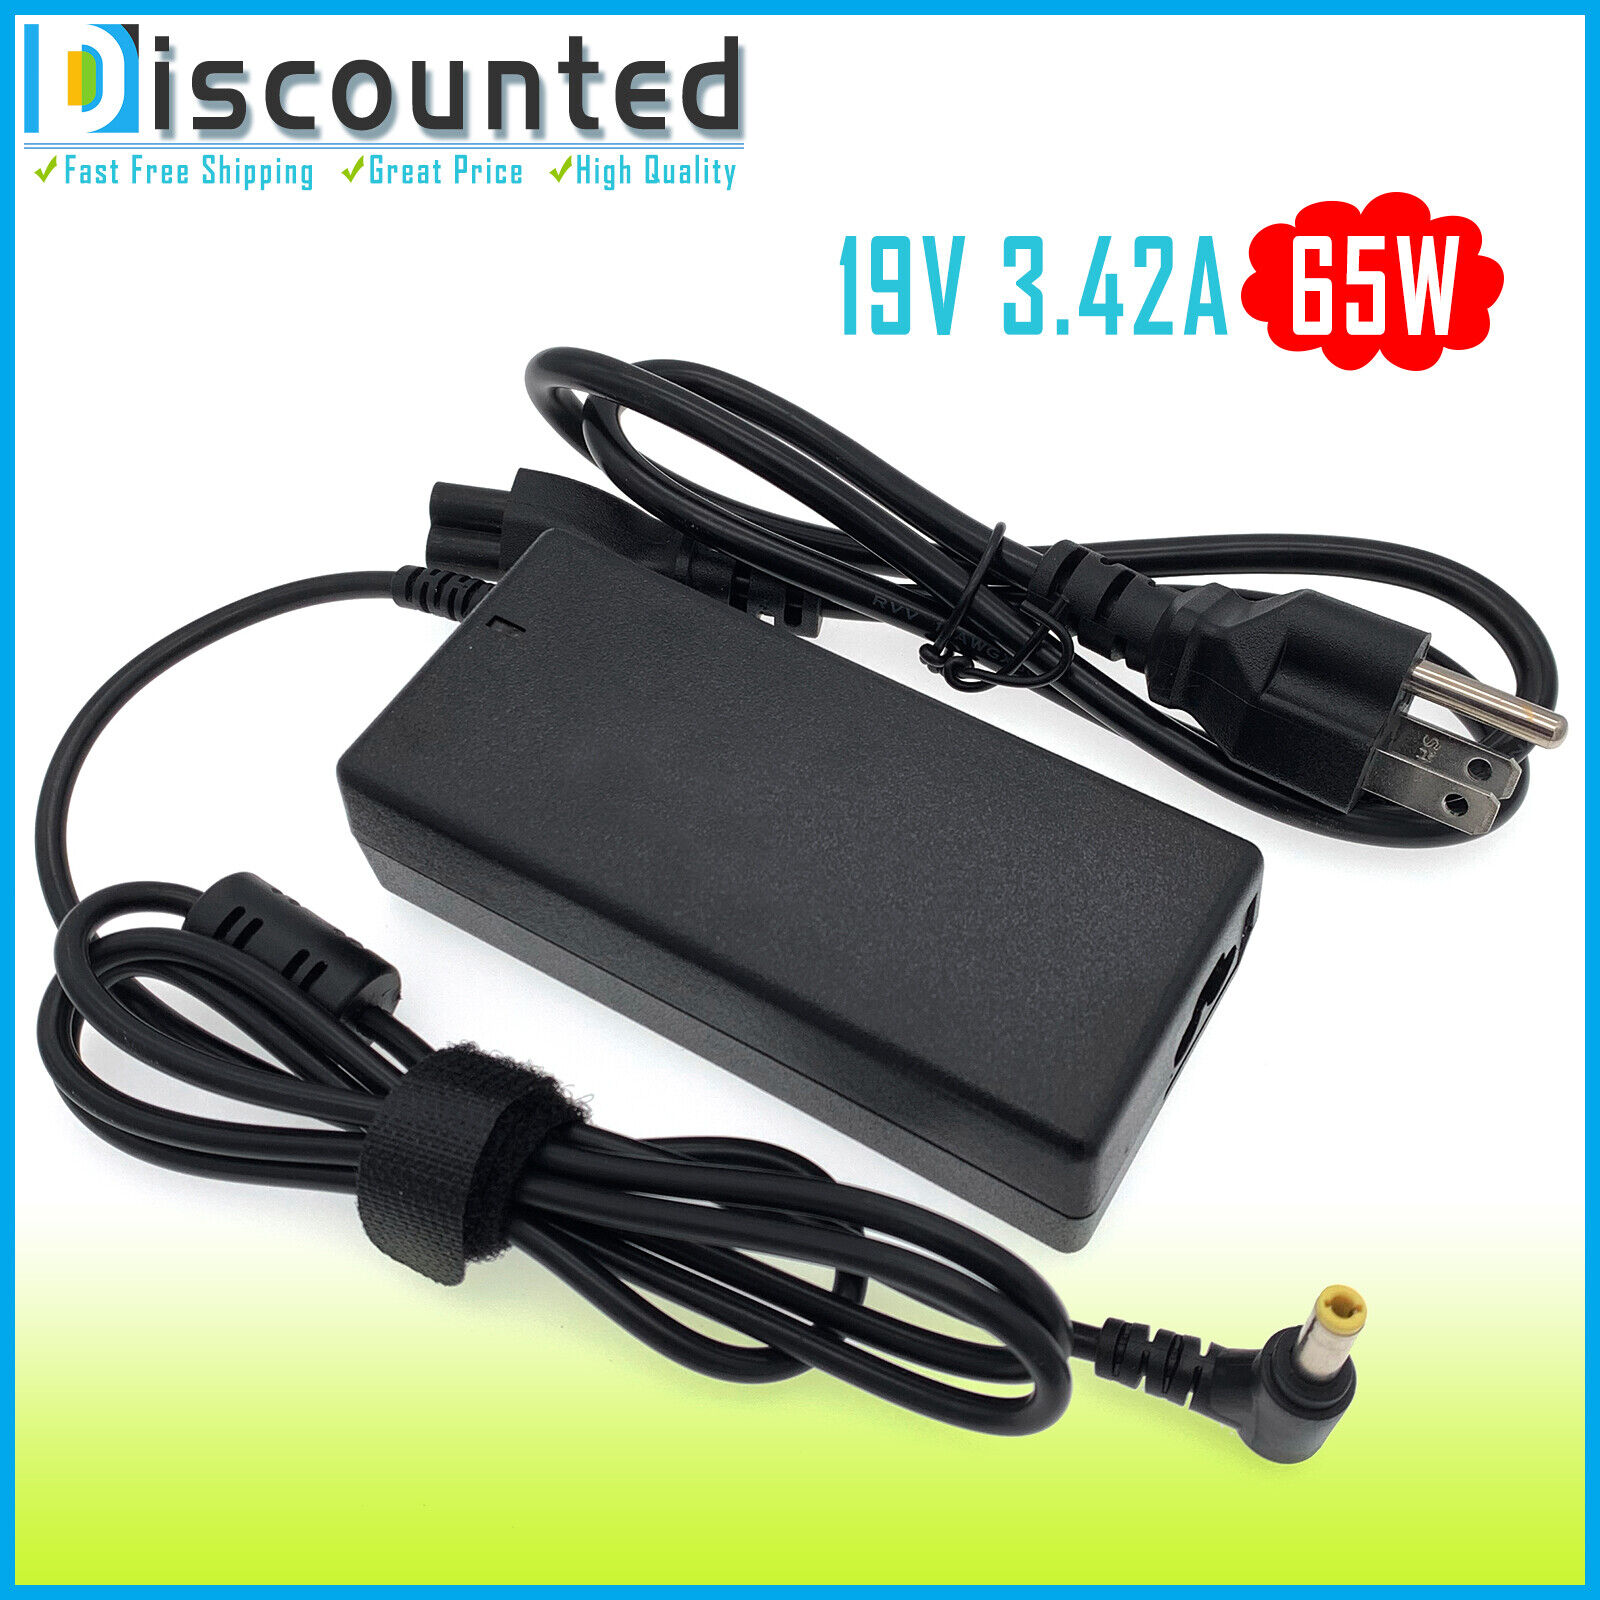 AC Adapter/Power Supply&Cord for Toshiba Satellite A135-S7403 L775D-S7340